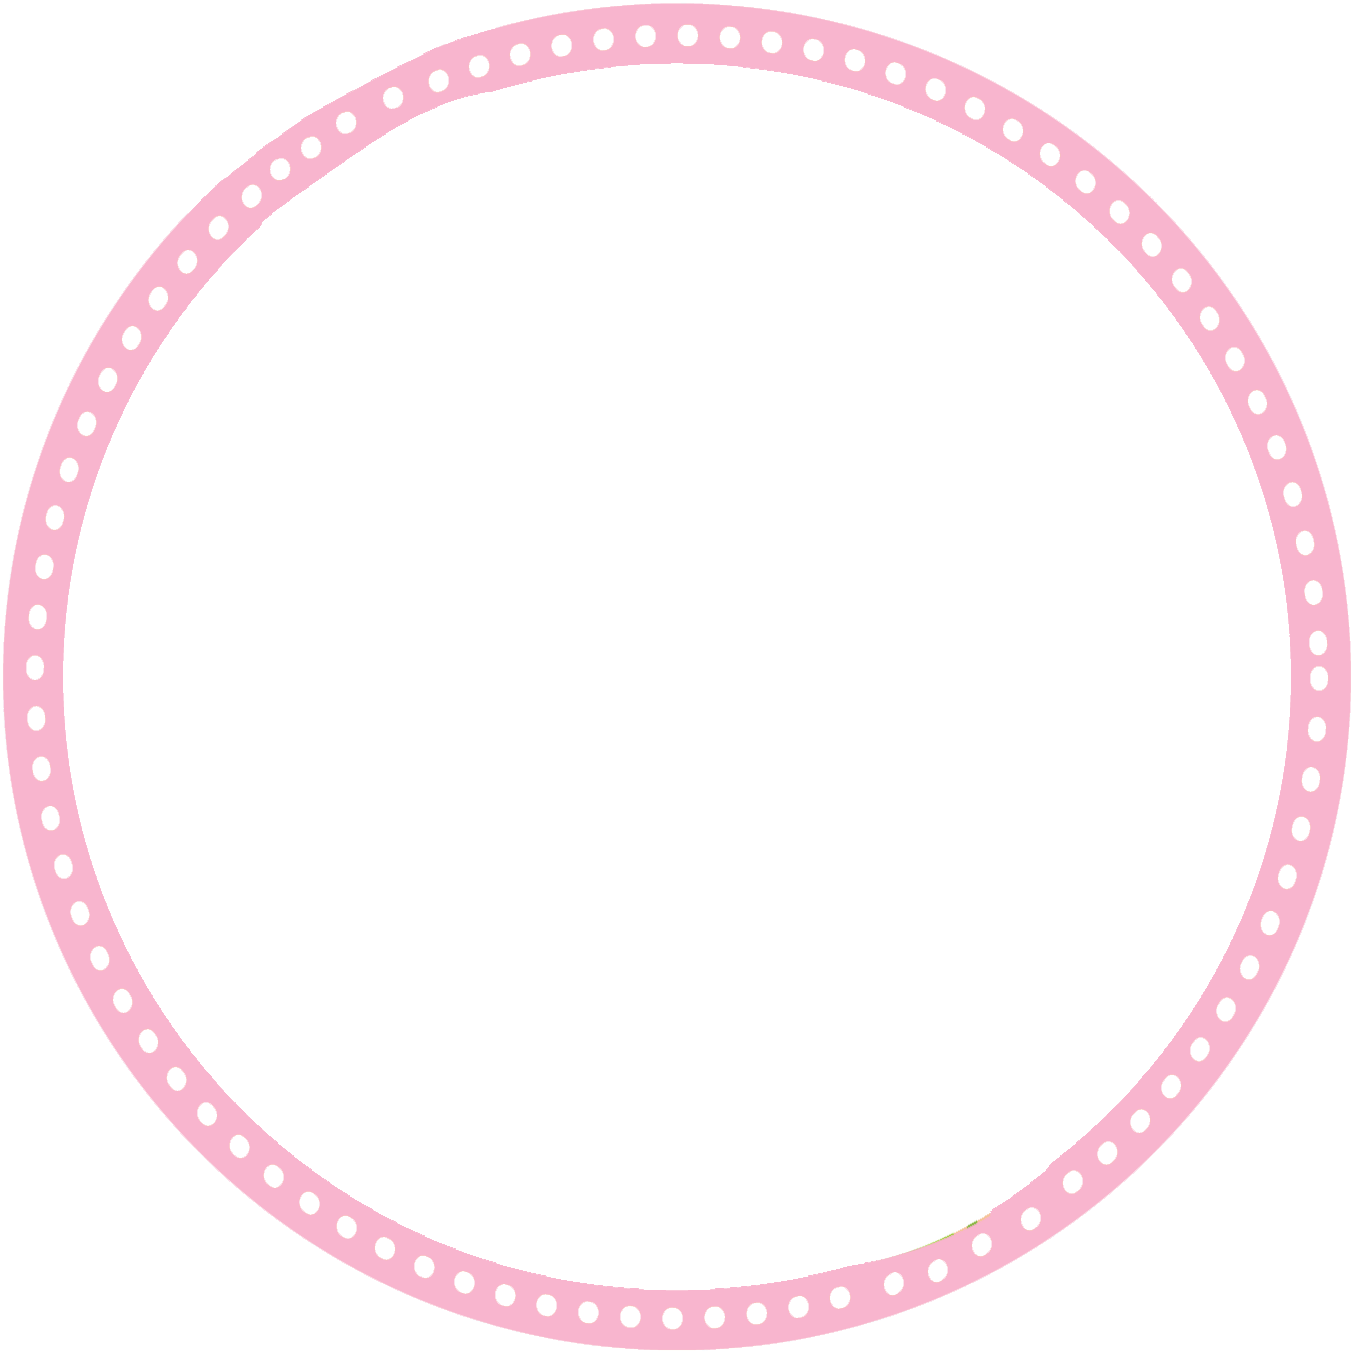 Pink Dotted Circle Border Graphic PNG